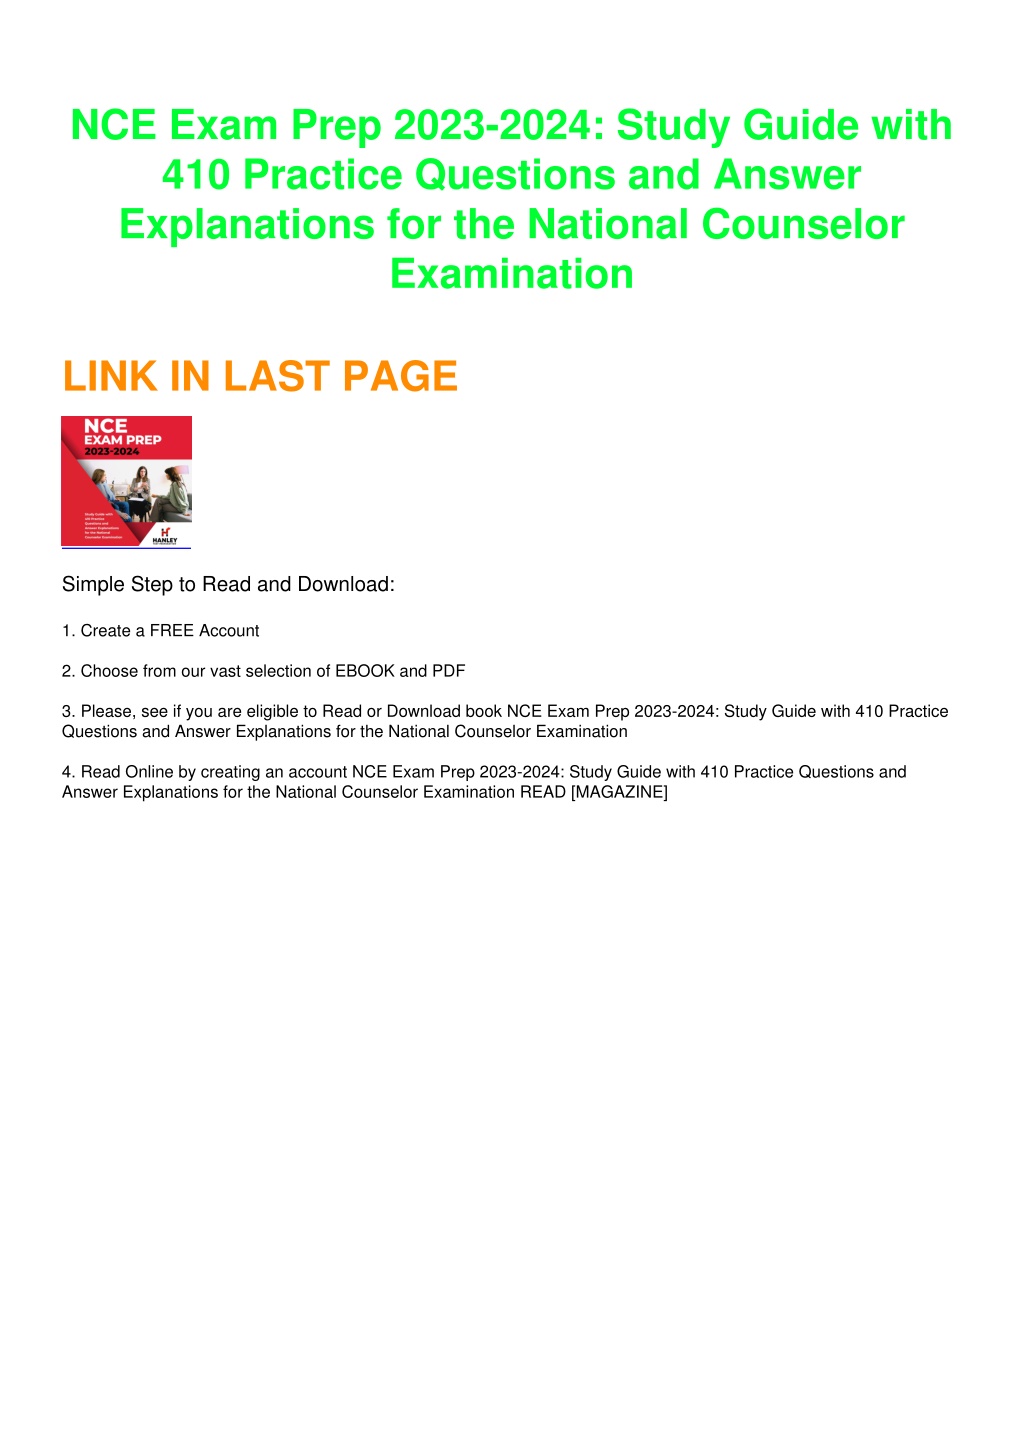 PPT [PDF] DOWNLOAD FREE NCE Exam Prep 20232024 Study Guide with 410